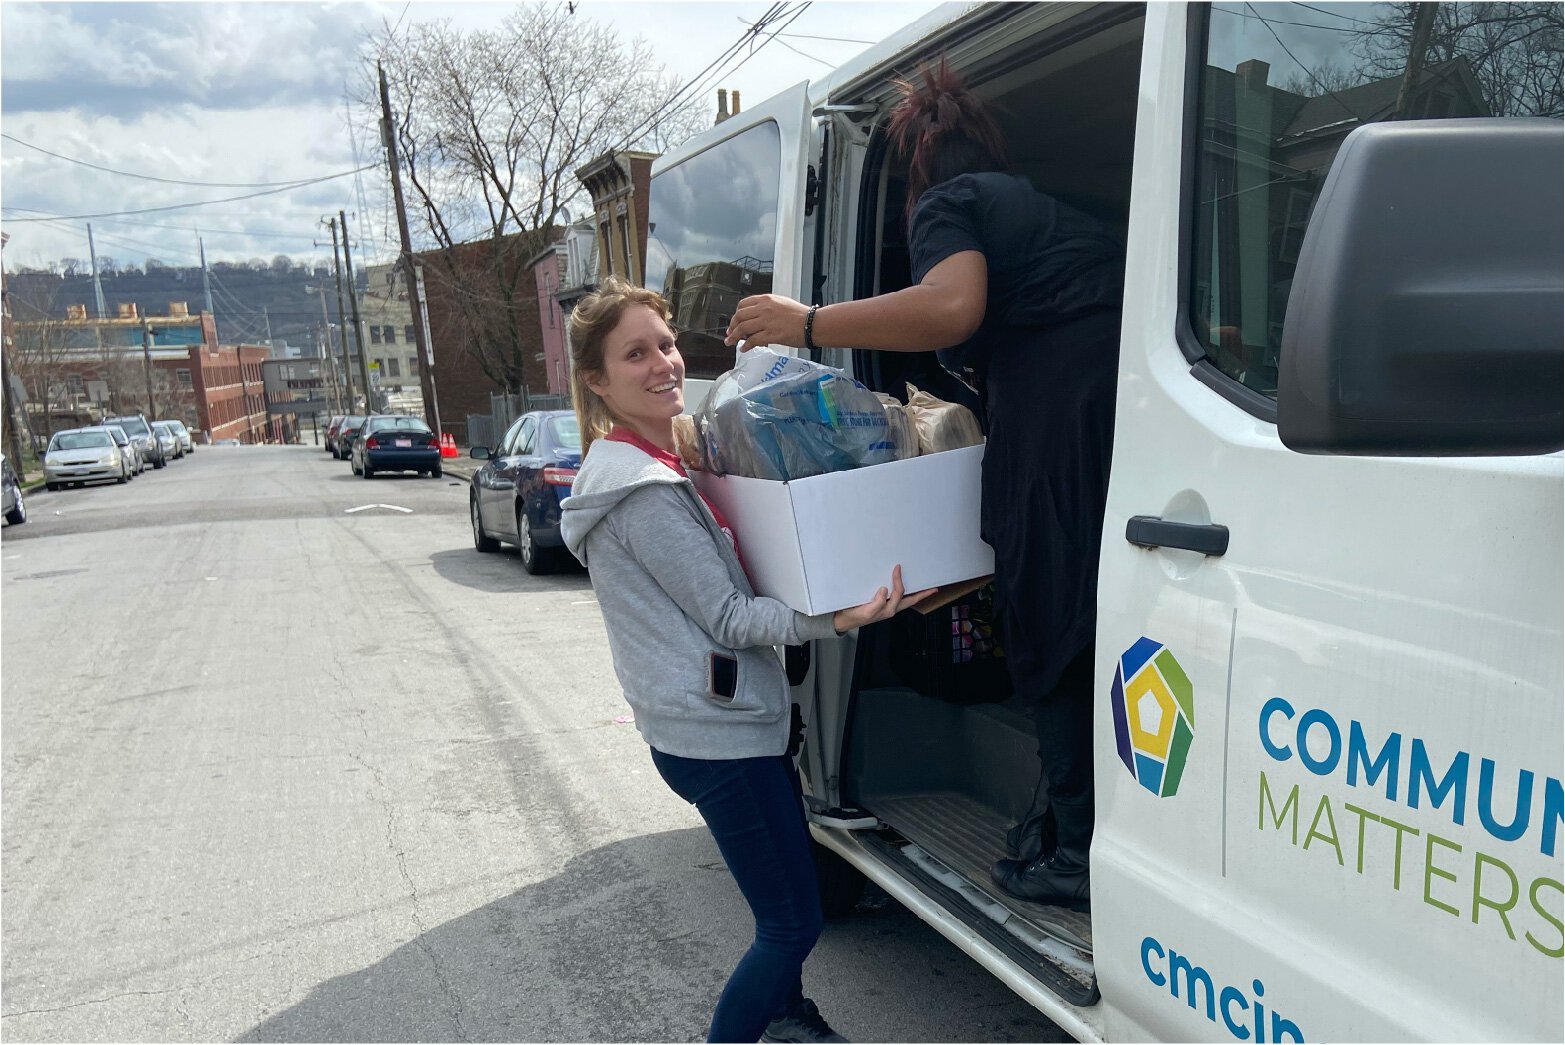 For the last two weeks, the entire Community Matters team has banded together to take phone orders, pack boxes, and deliver critical pantry items to the doorsteps of residents in zip 45204.